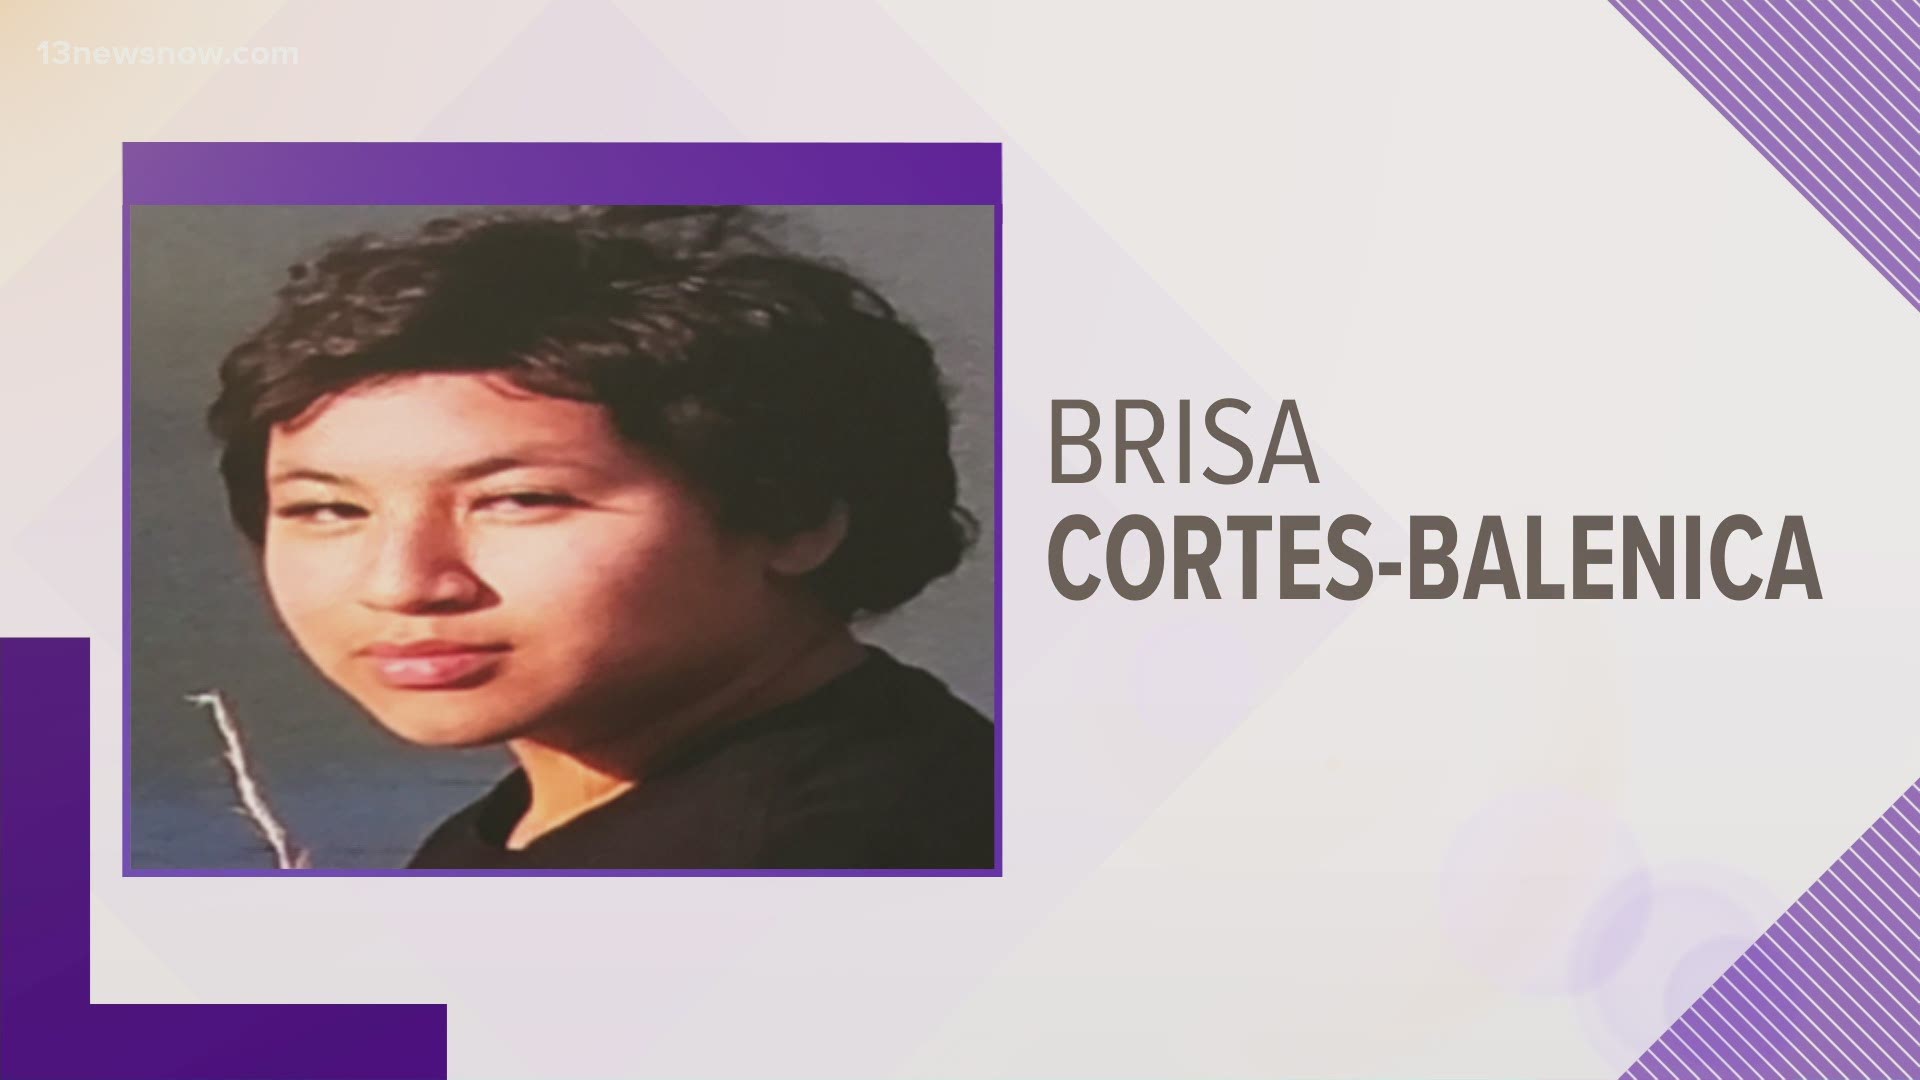 17-year-old Brisa Cortes-Balenica has been missing since Tuesday, March 30.